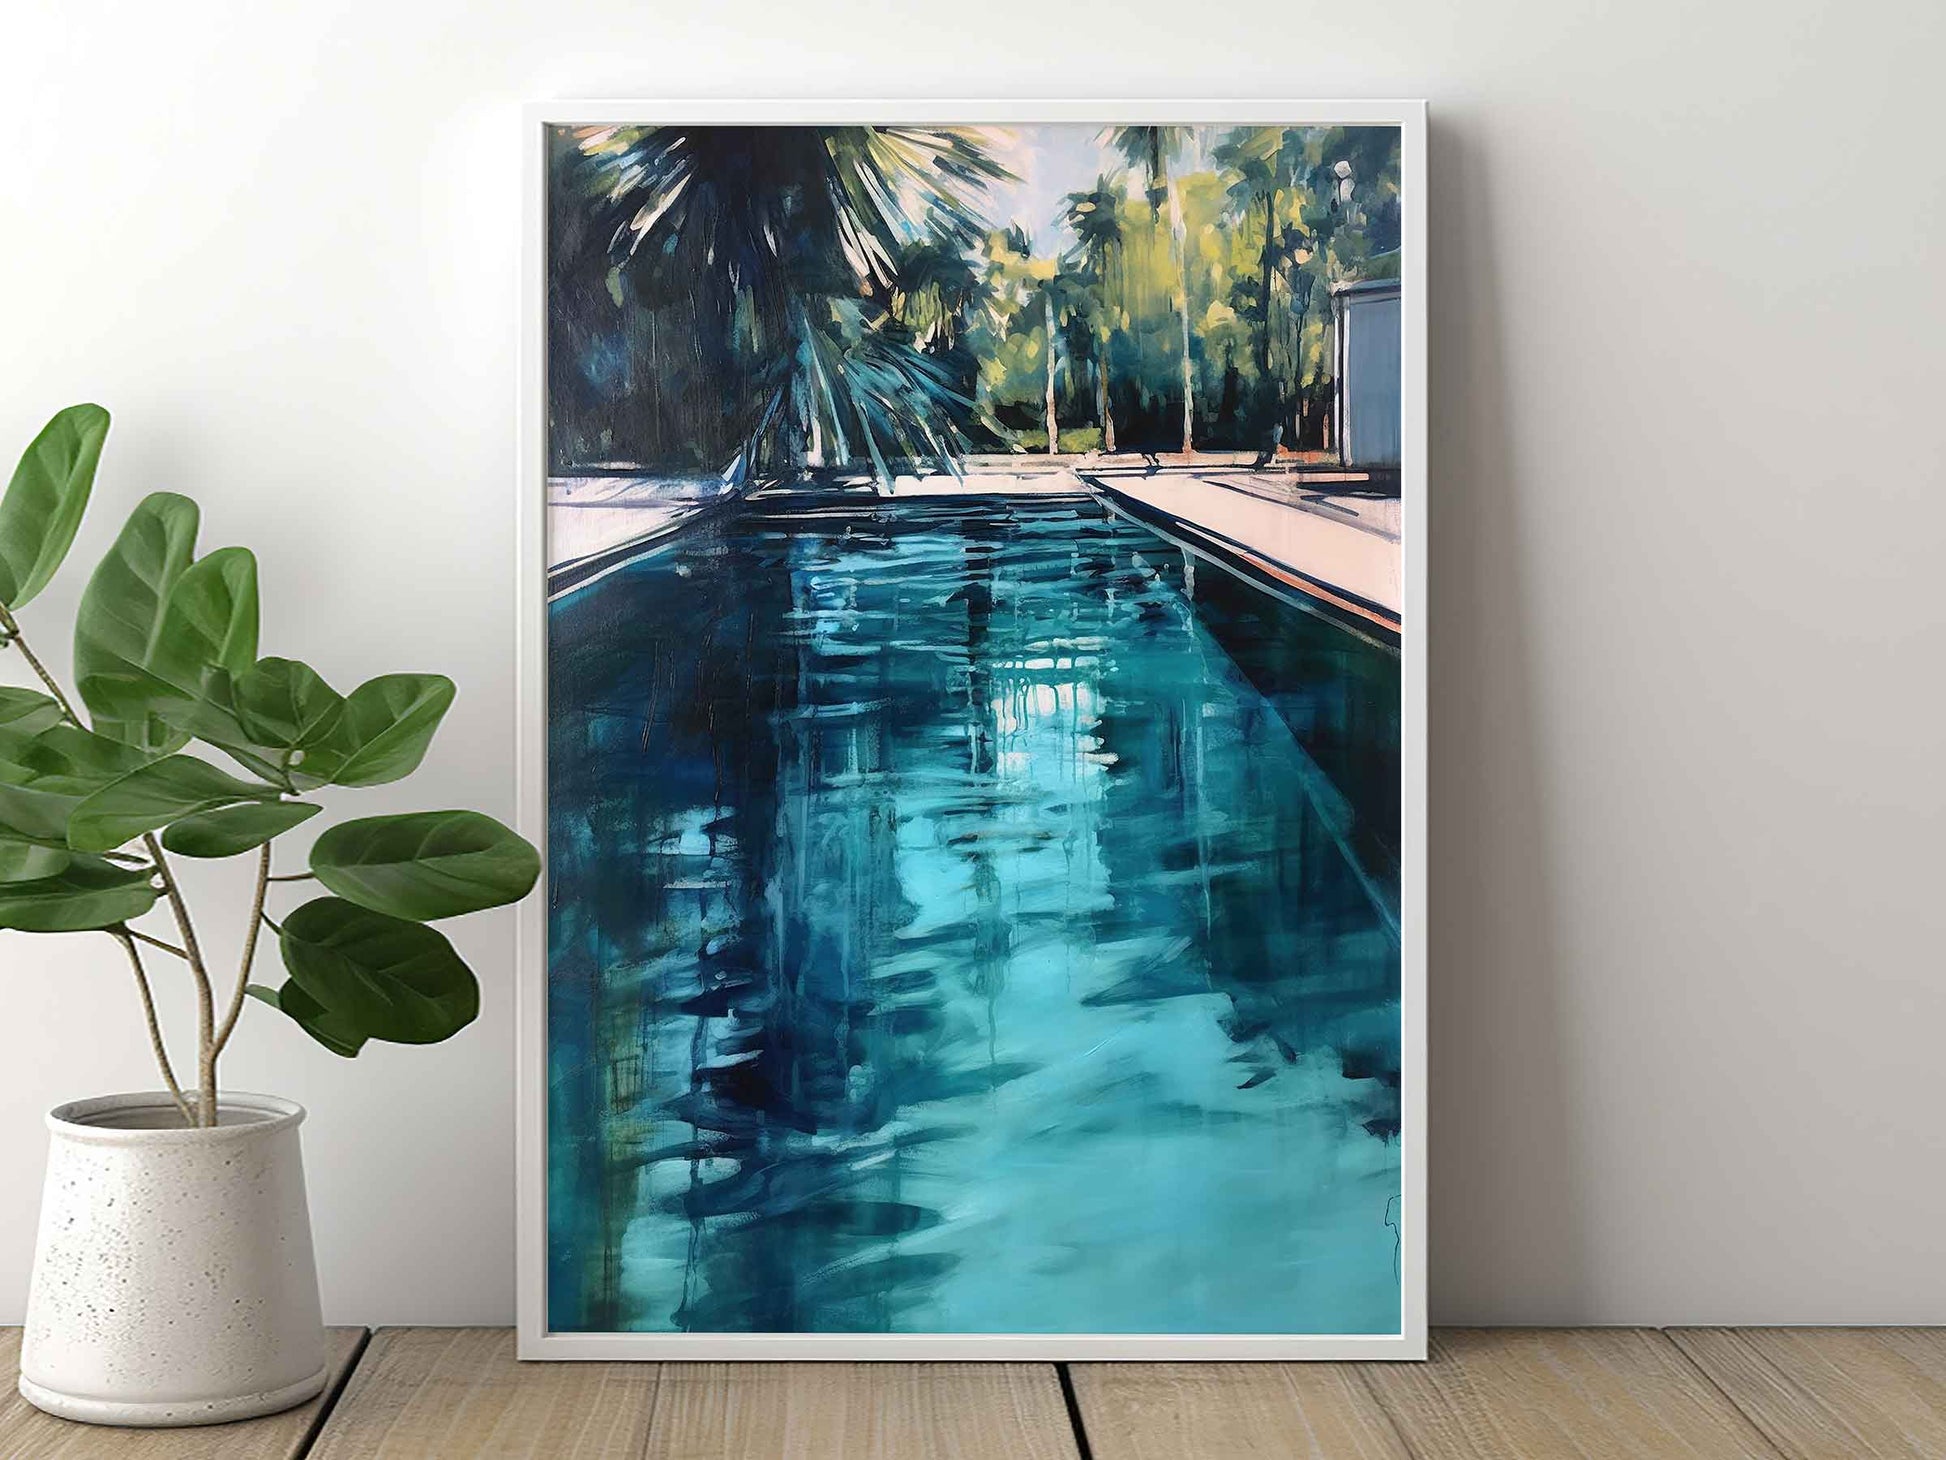 Framed Image of Abstract Water Reflections and Swimming Pool Wall Art Prints